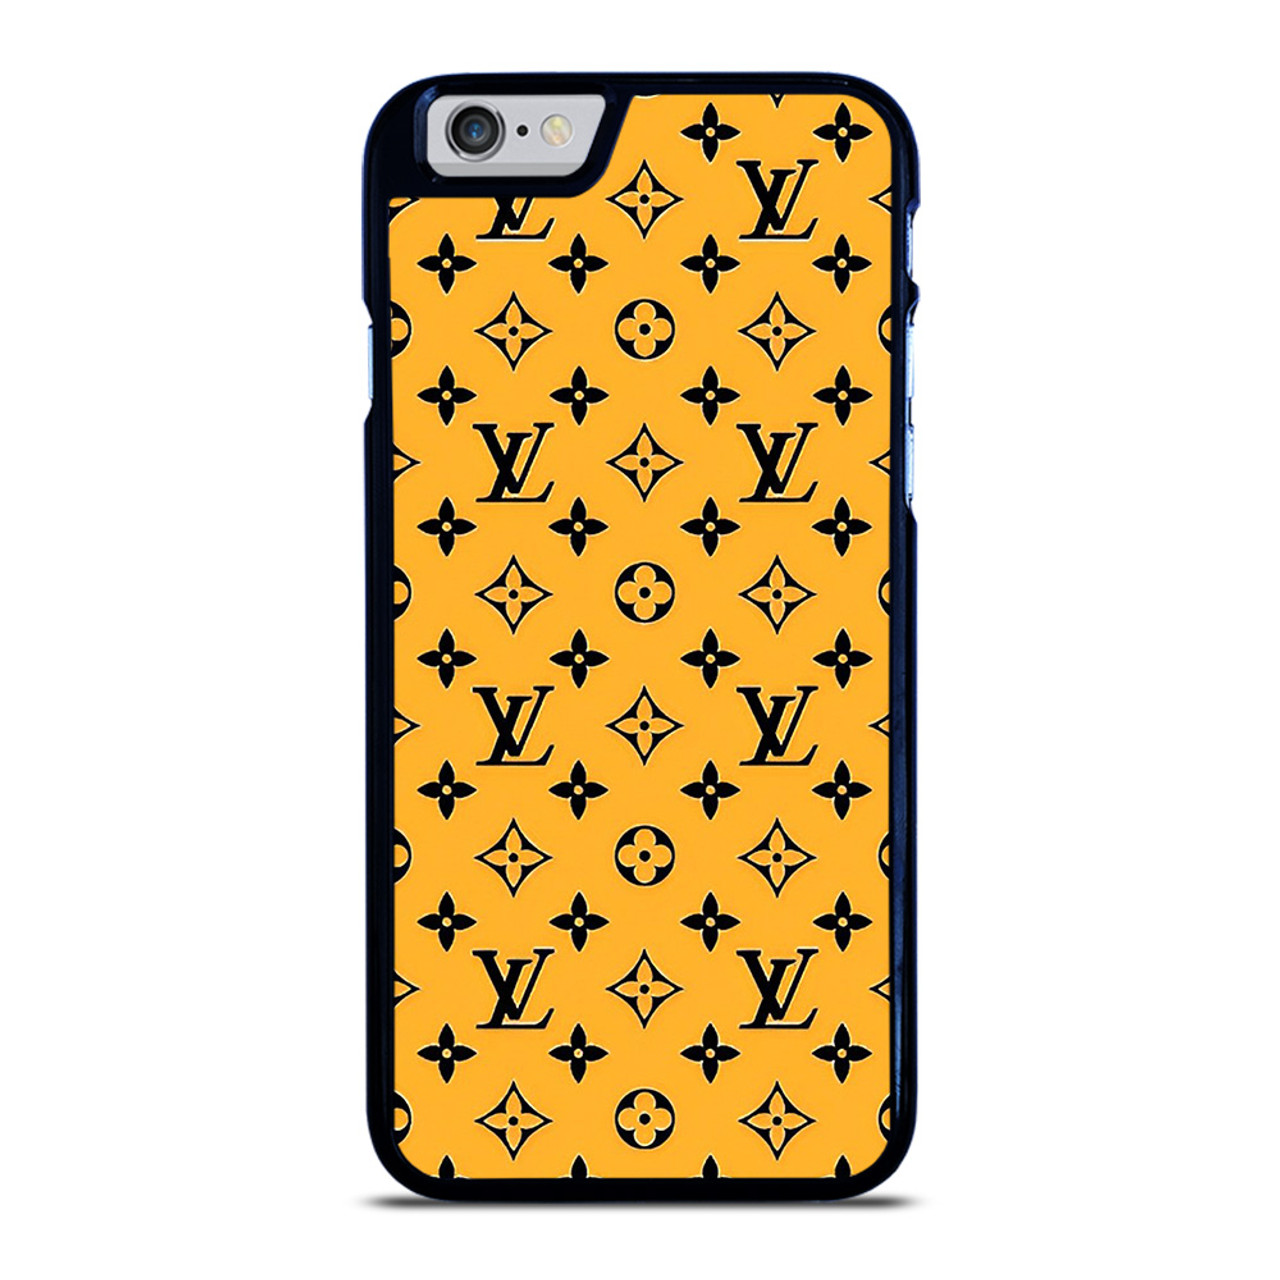 VUITTON LV YELLOW PATERN ICON LOGO iPhone 6 / 6S Case Cover